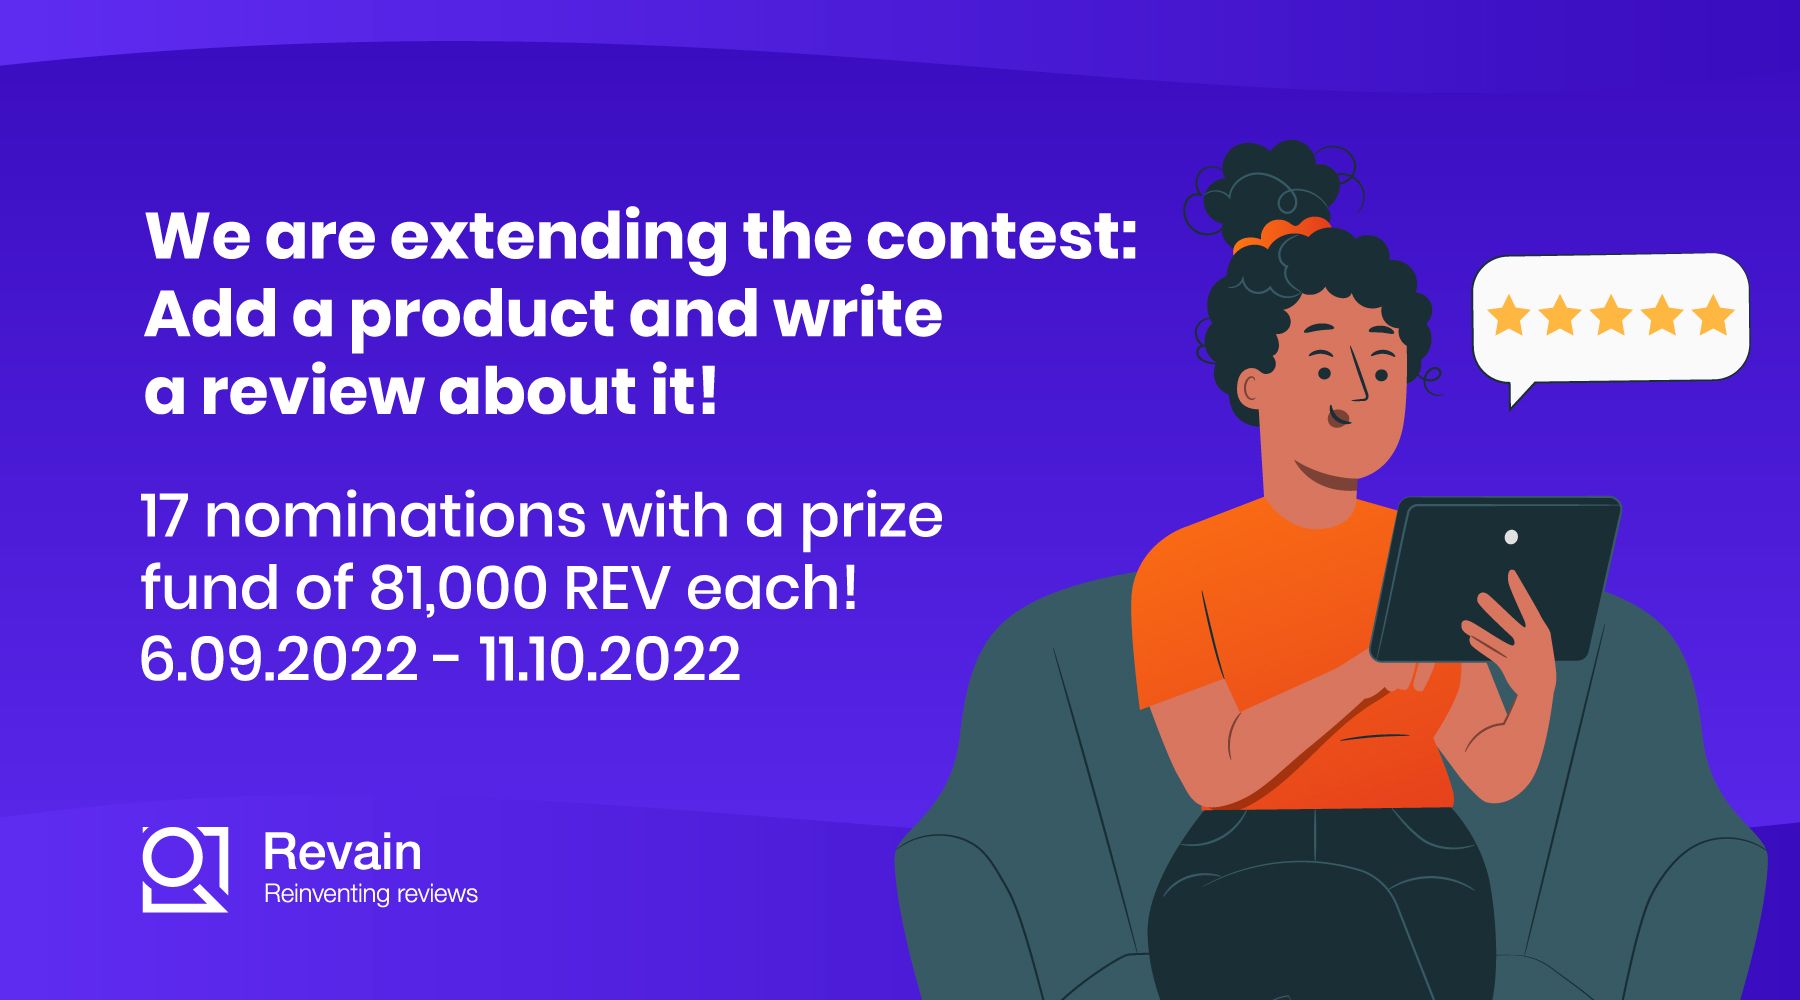 We are extending the contest: Add a product and write a review about it!